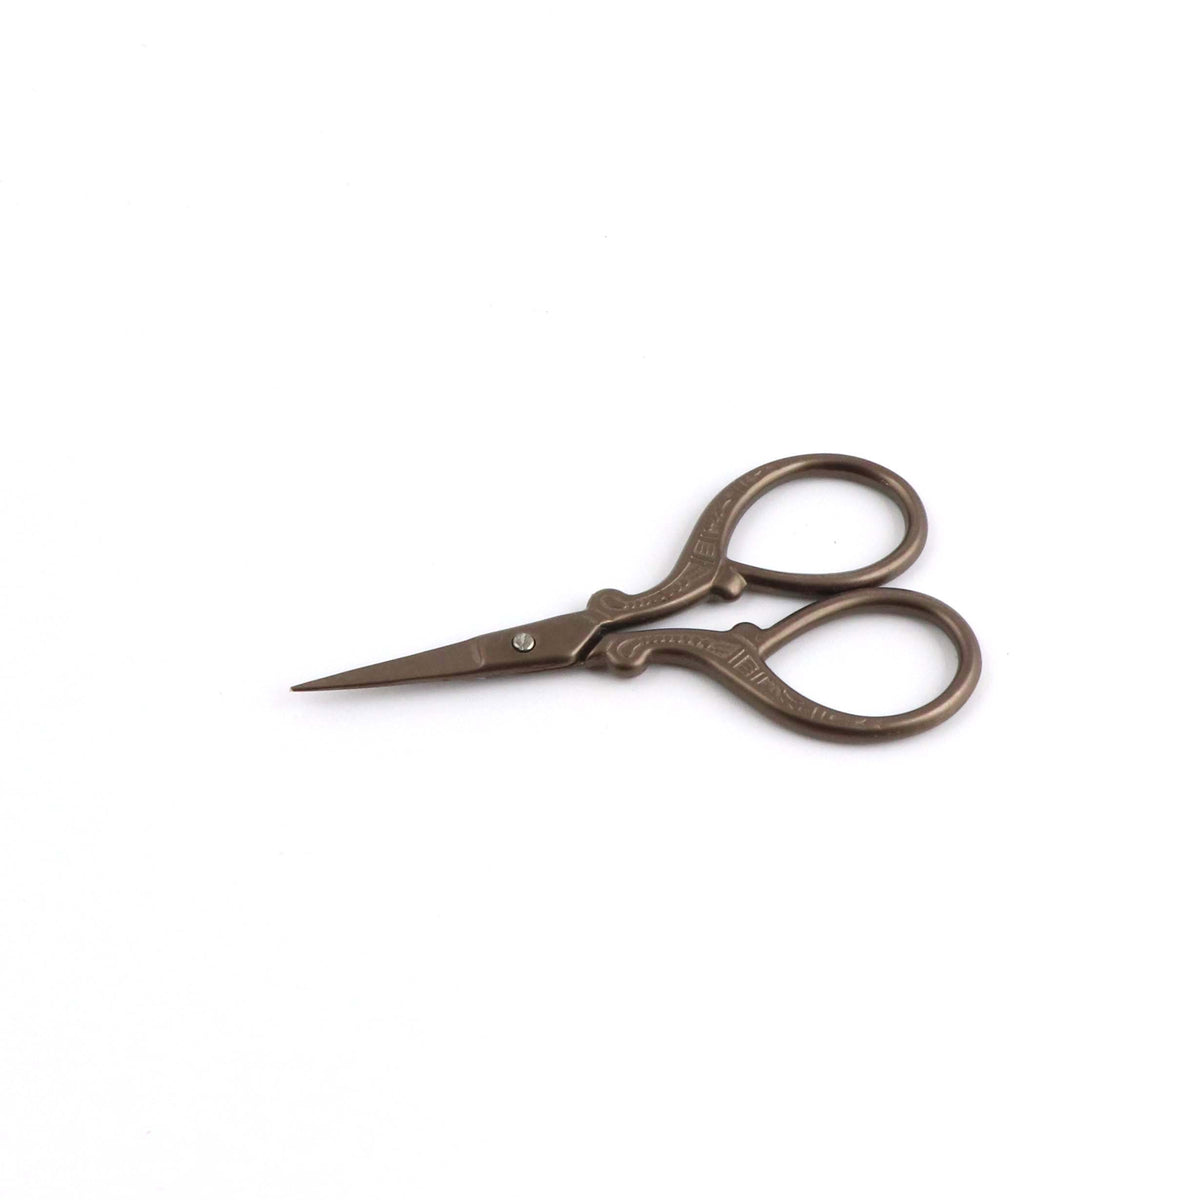 Embroidery scissors, brown 3.5 inches - Colorway Arts